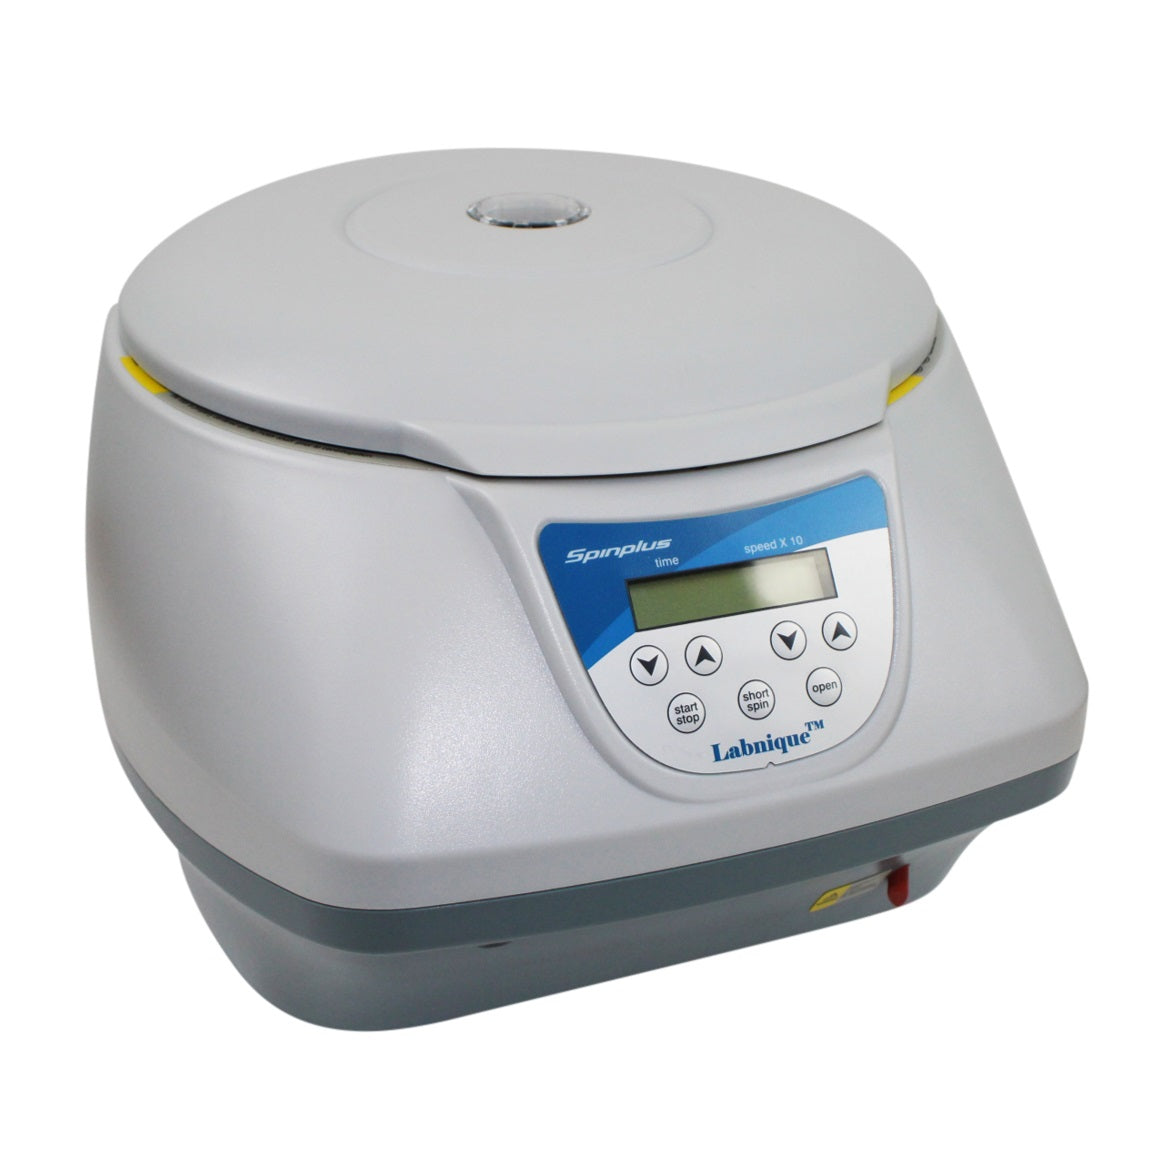 Digital Bench-top Centrifuge, 100-4000rpm, 8x15ml Rotor with Adapters for 7 ml and 5 ml Tubes